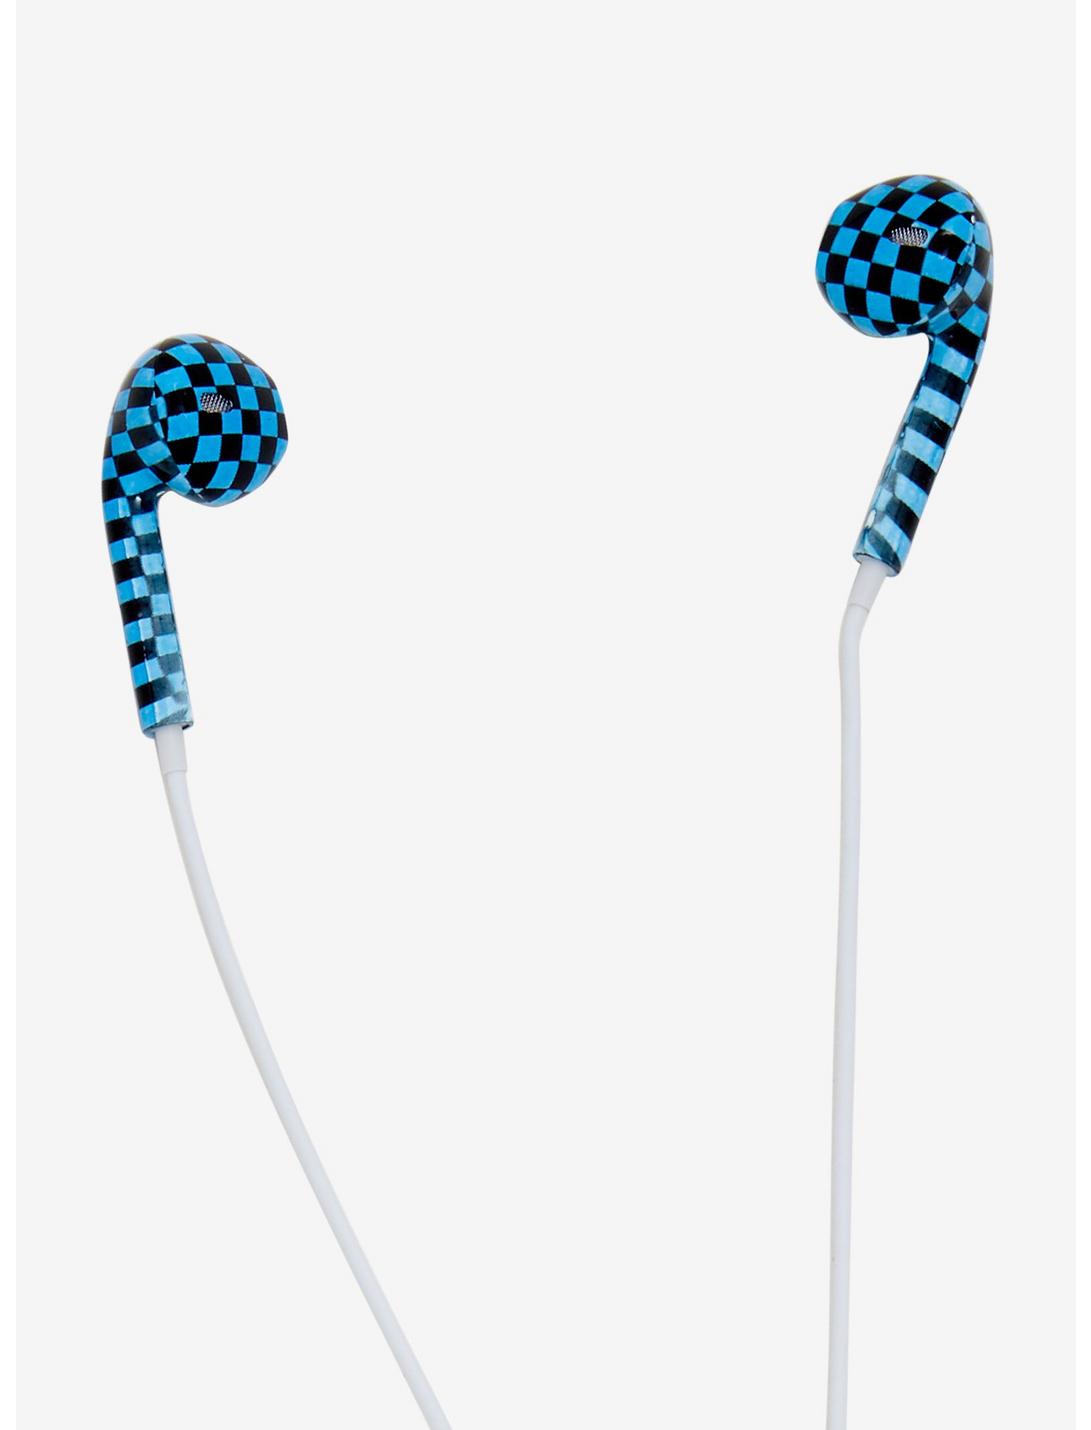 Blue & Black Checkered Earbuds, , hi-res